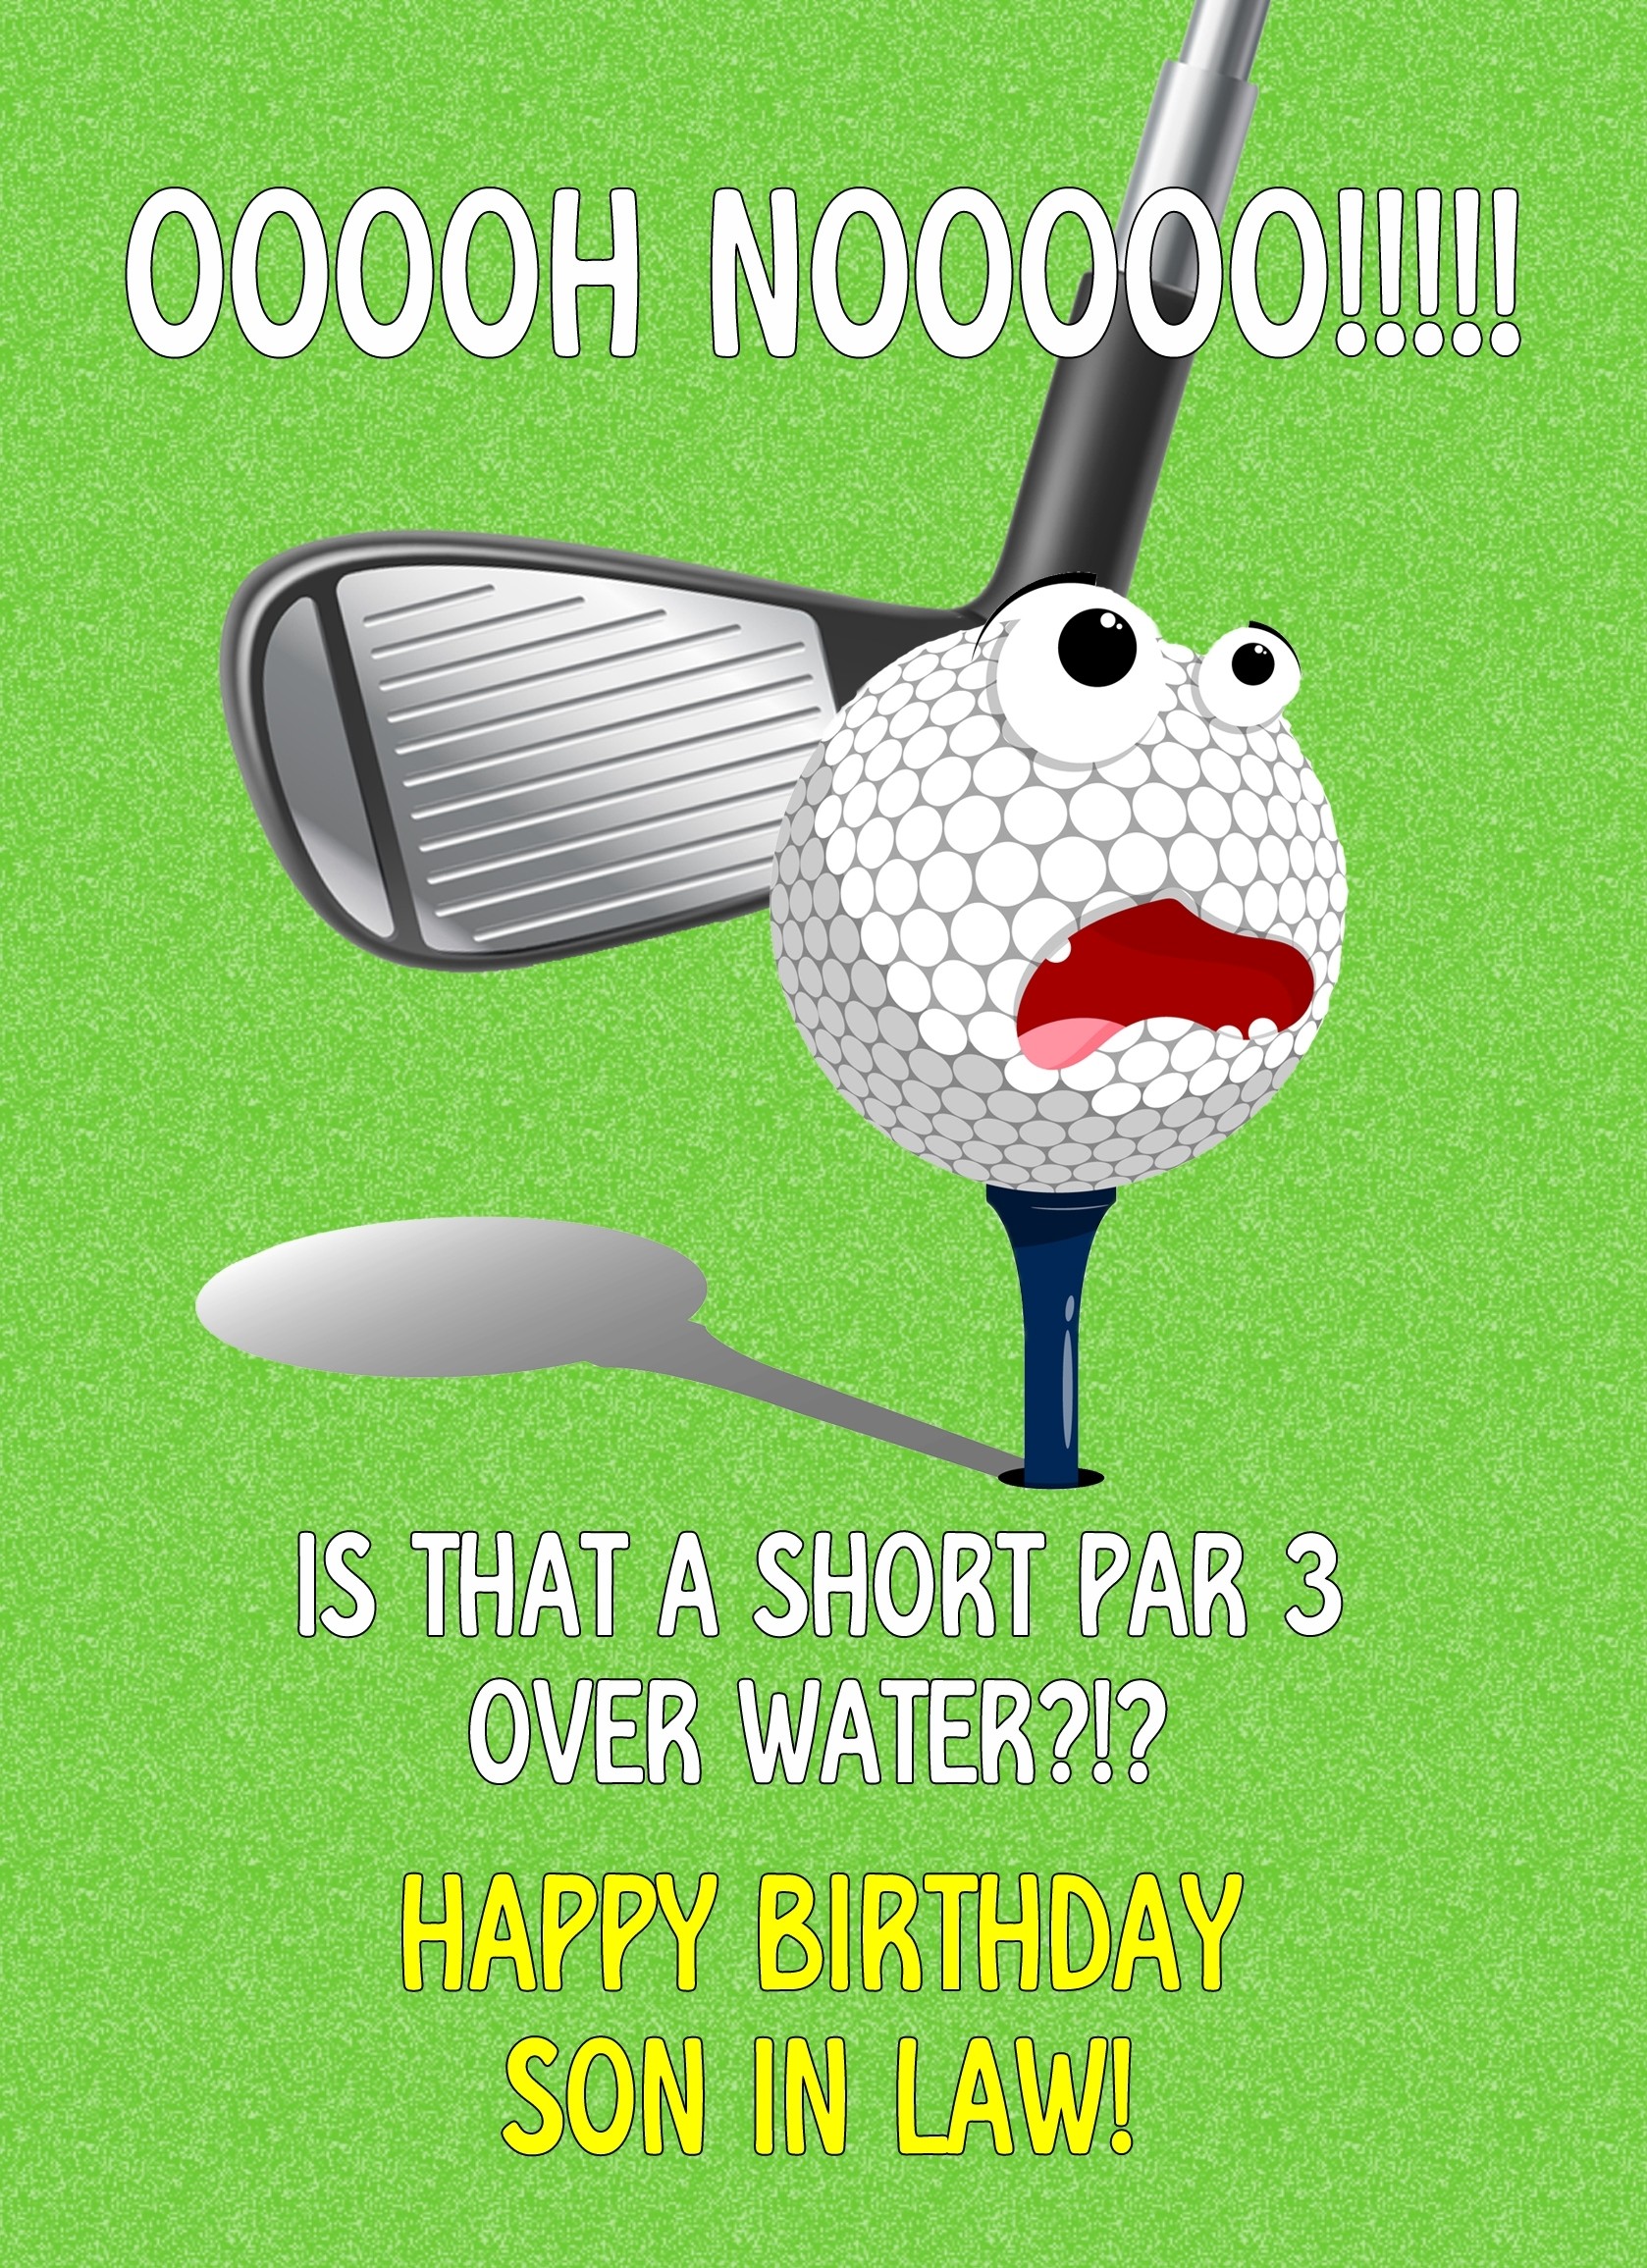 Funny Golf Birthday Card for Son in Law